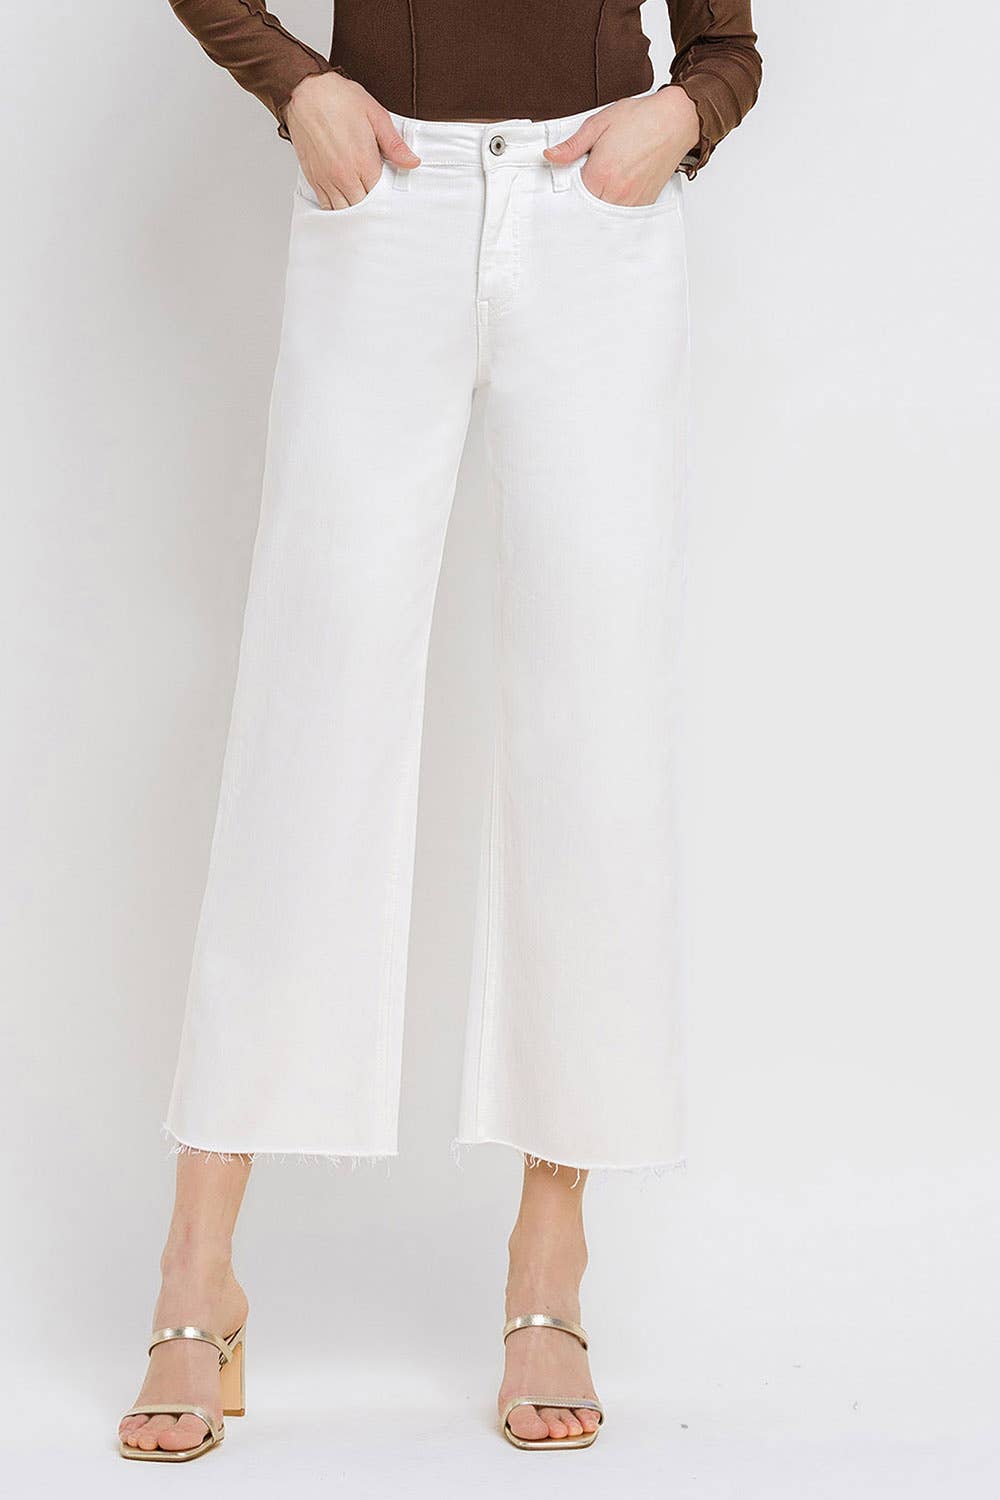 VERVET by FLYING MONKEY - HIGH RISE CROP WIDE LEG JEANS T5894WH: OPTIC WHITE / 24